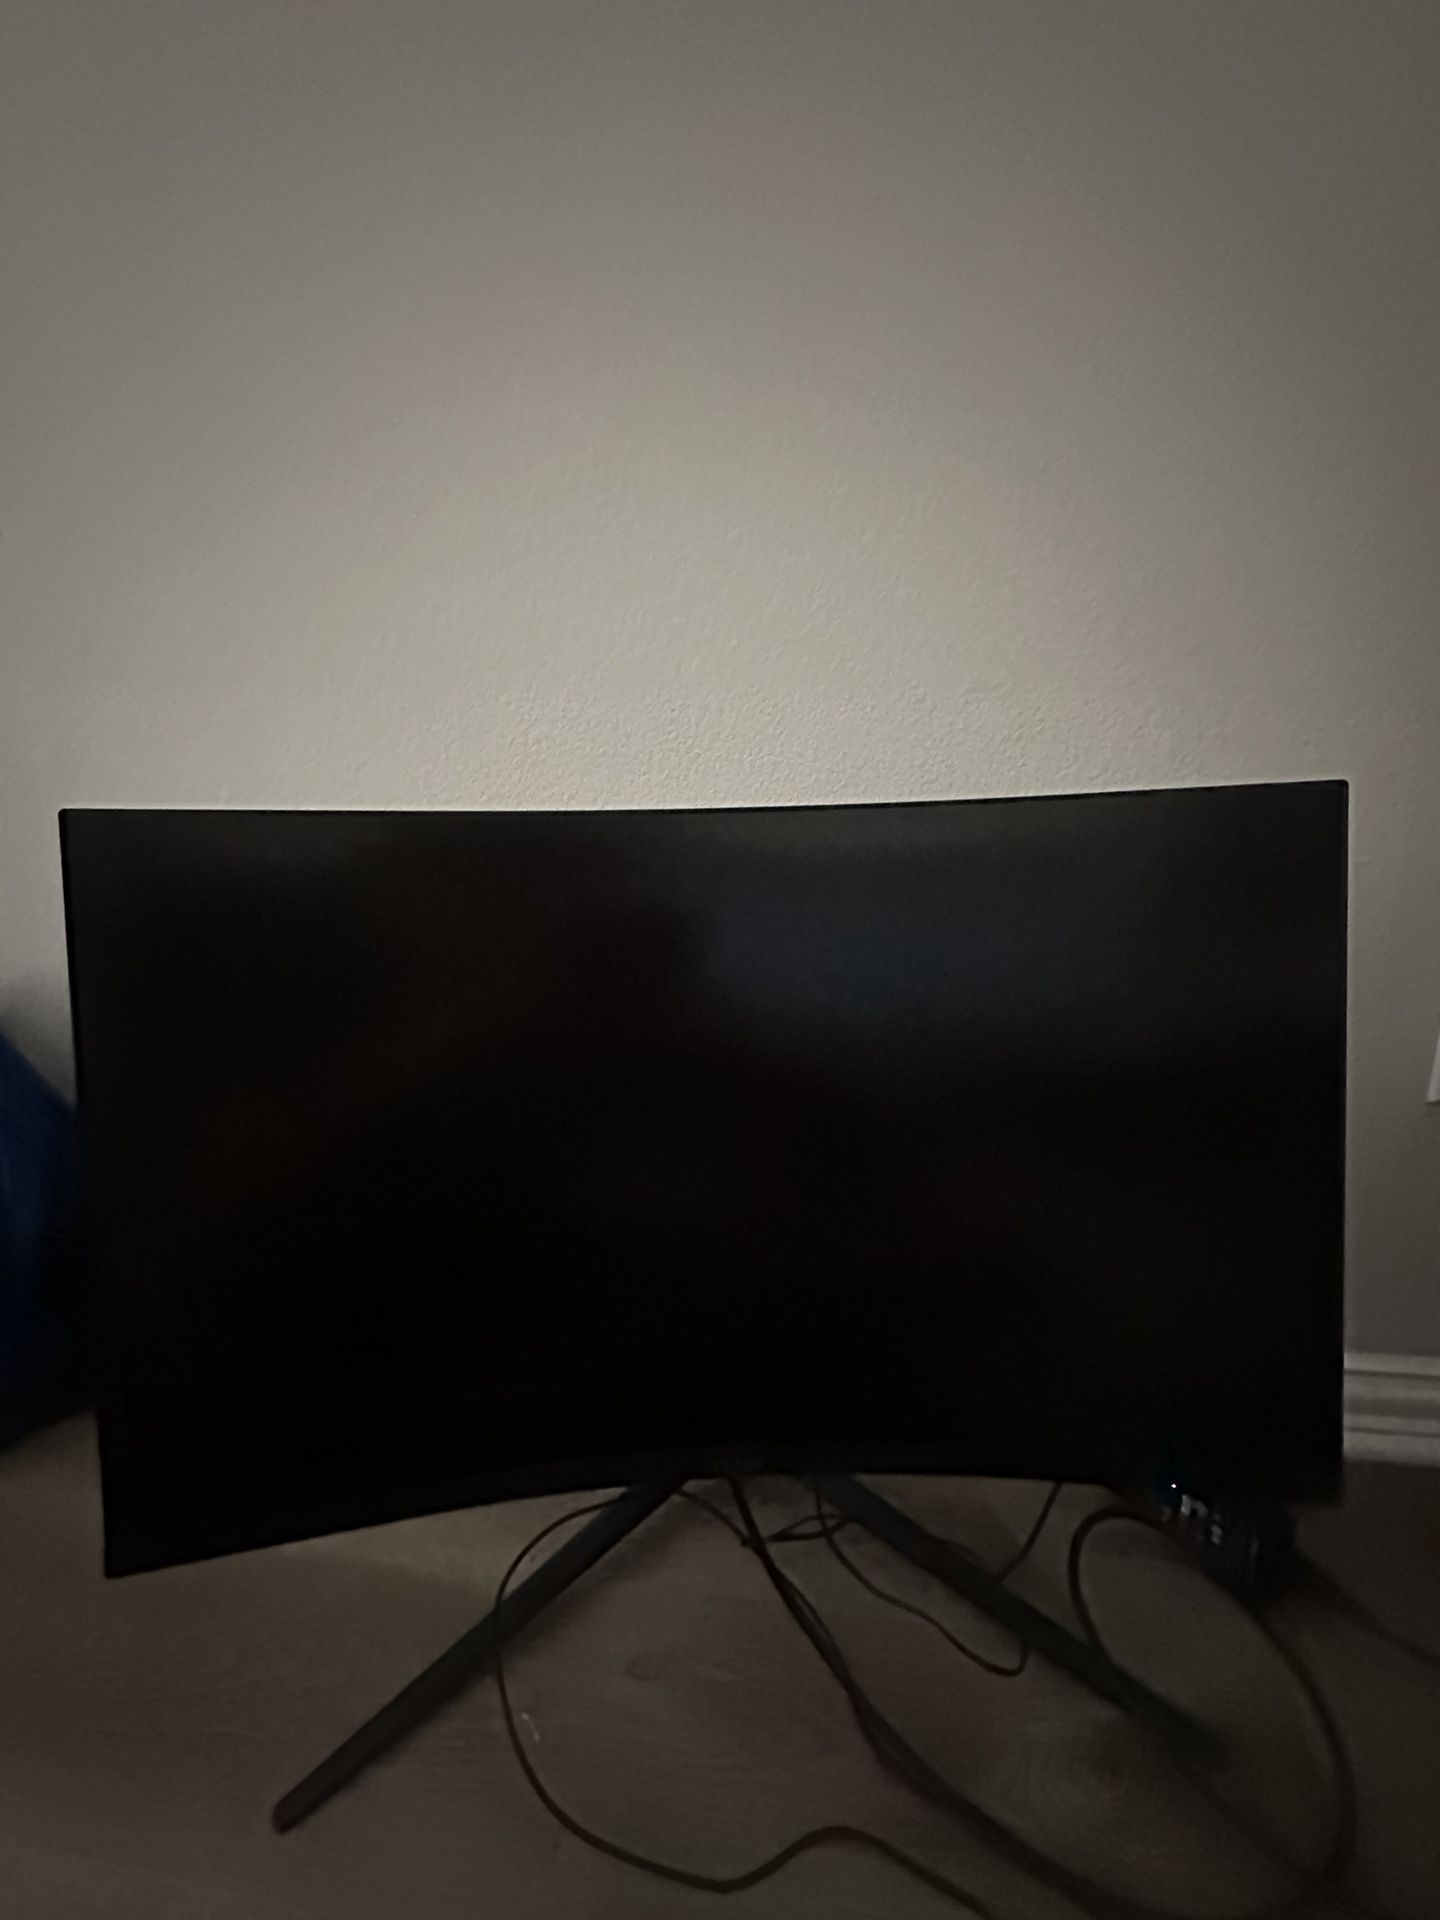 27” Curved MSI 170hz  Fully Adjustable Monitor, Basically Brand New 